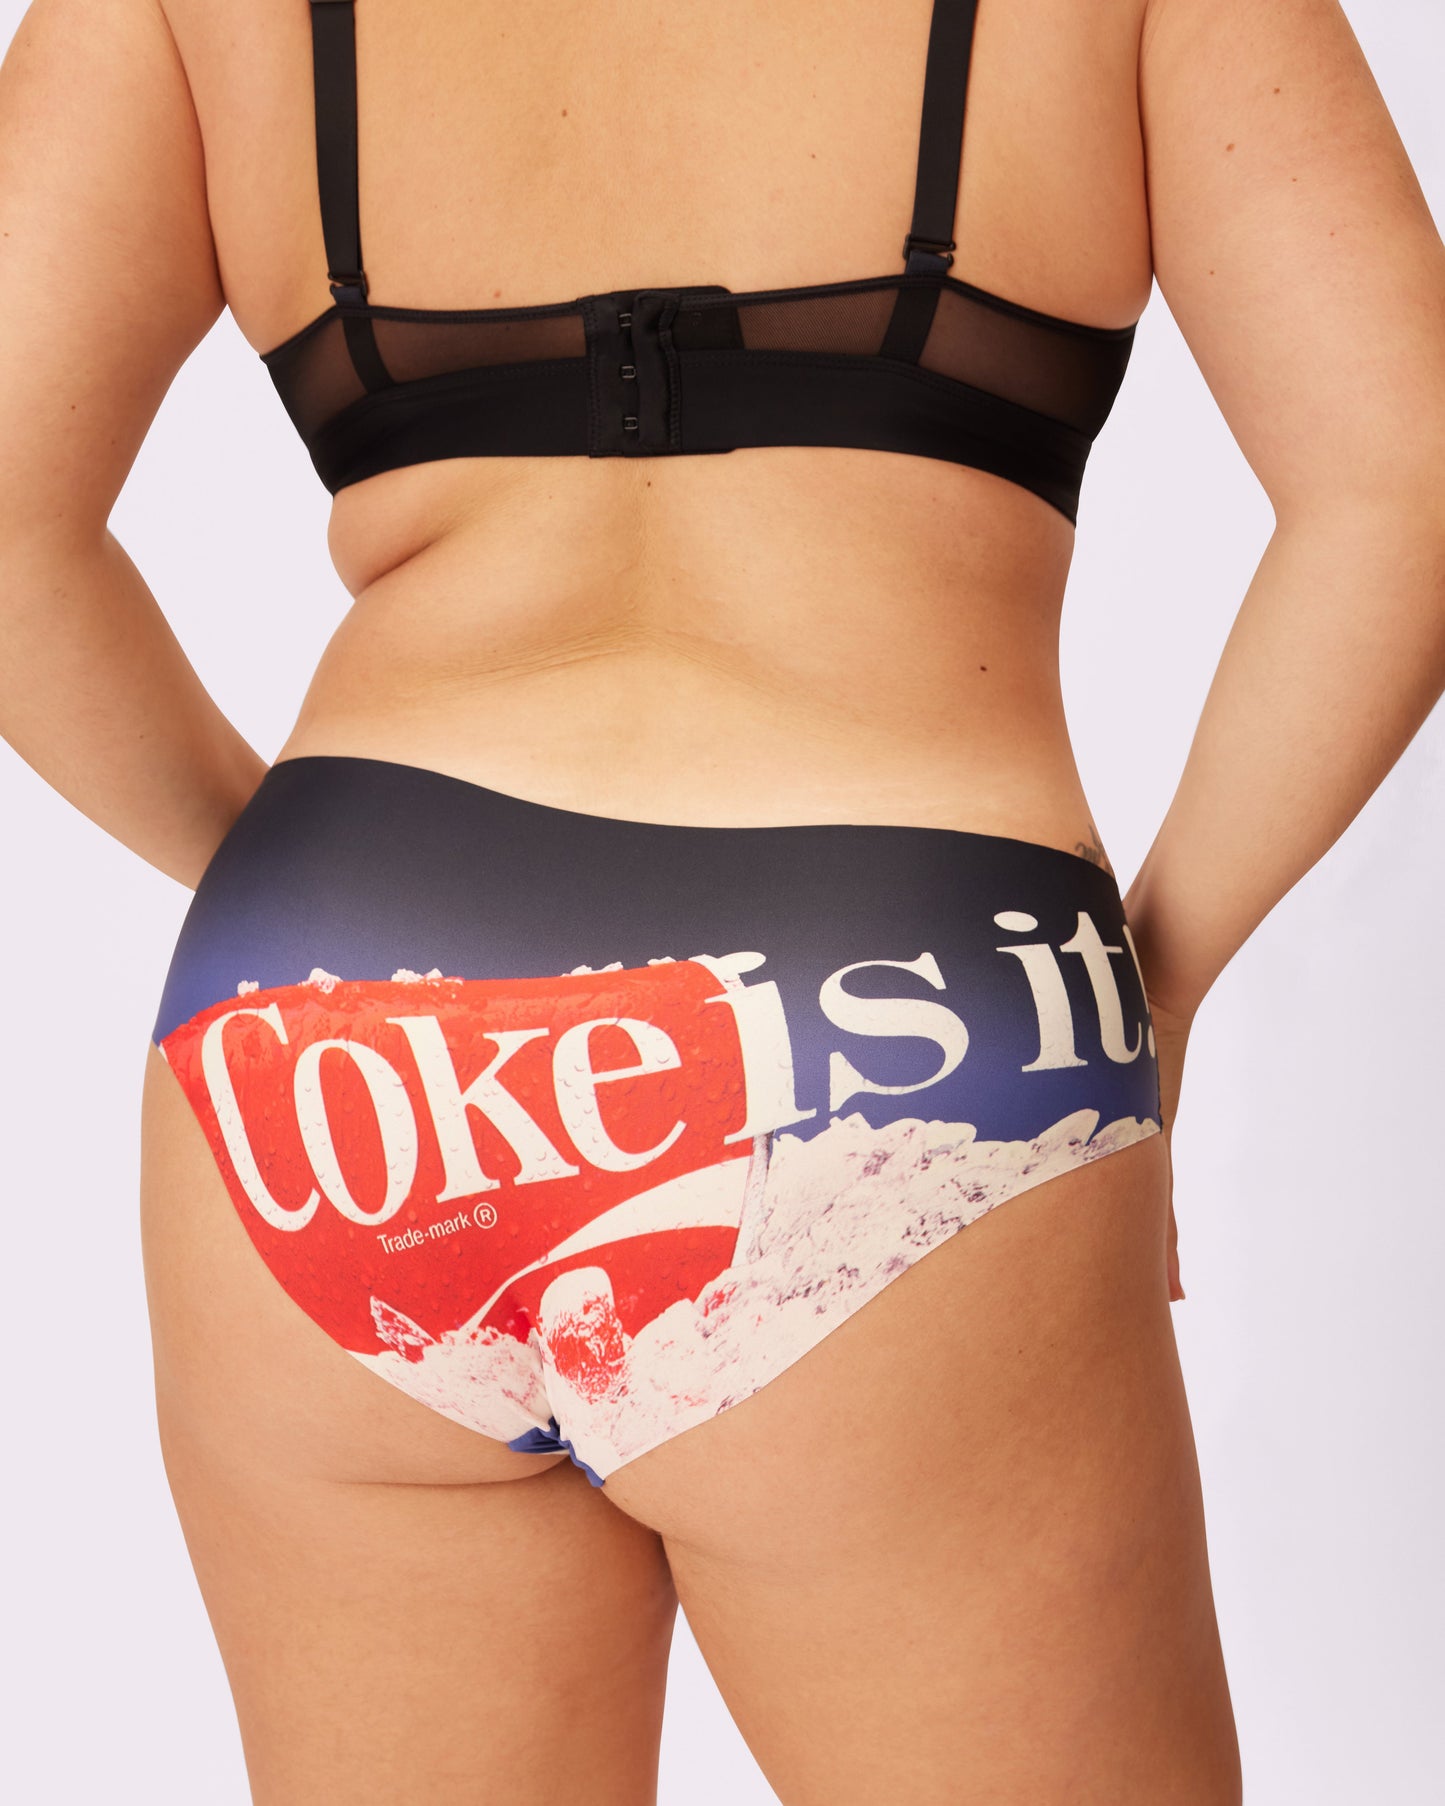 Special Edition Coca-Cola Invisible Sculpt Hip Hugger | Seamless Universal |  Archive (Coke Is It)